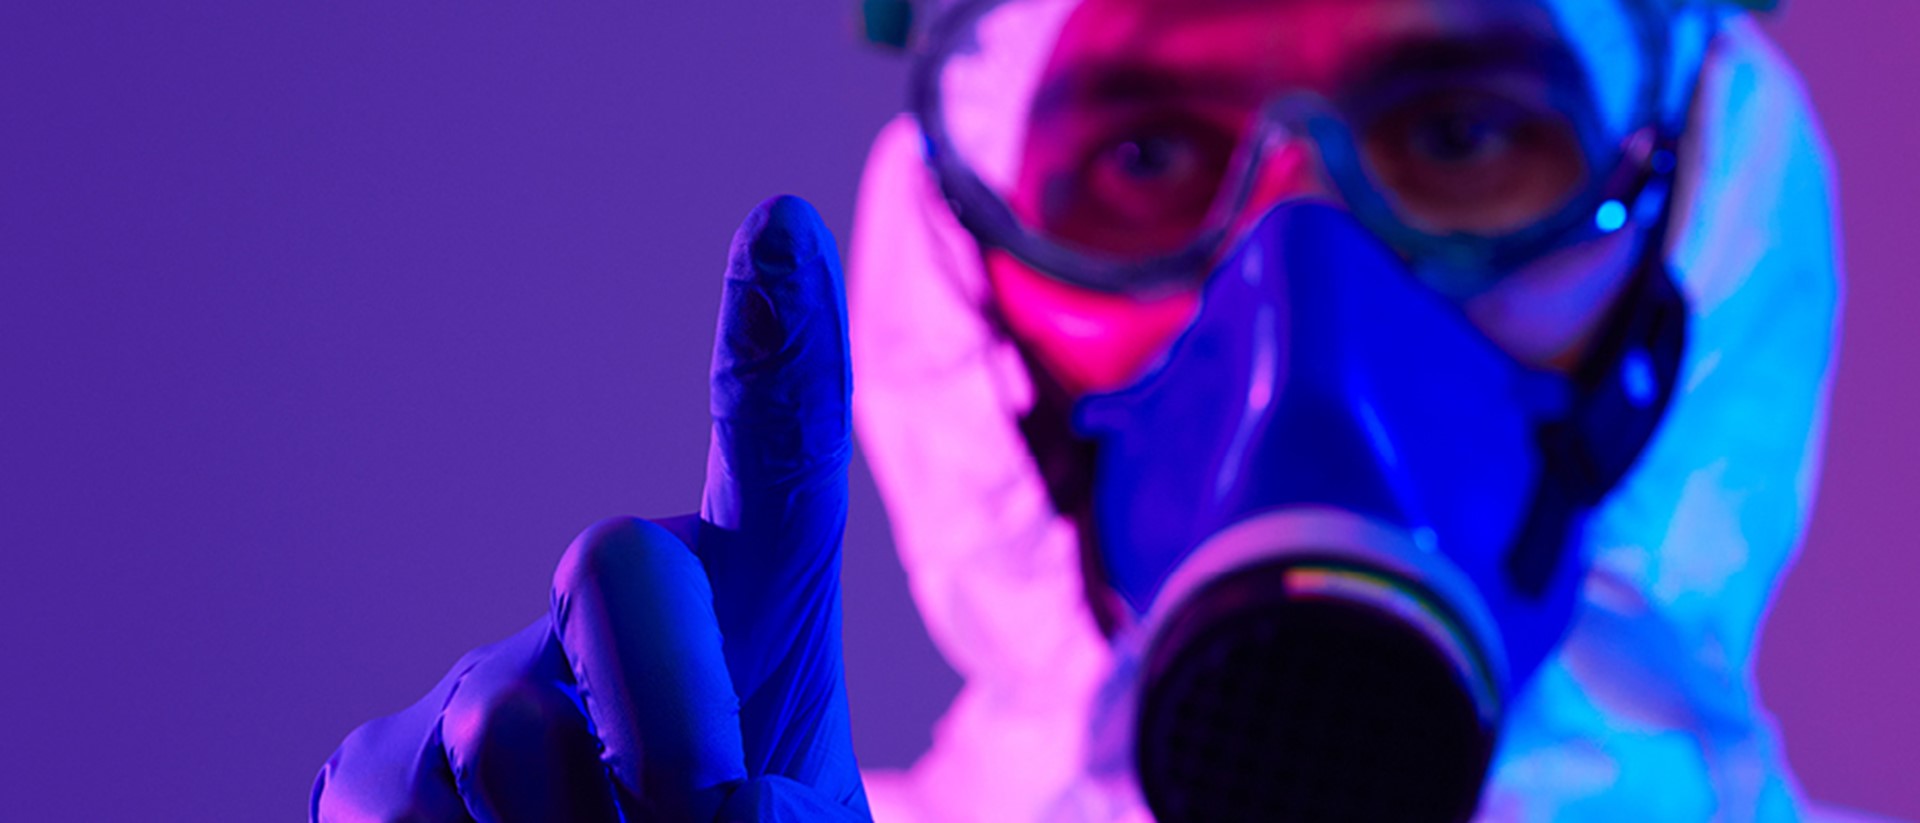 Image of man with a purple glove, wearing a gas mask on a purple background